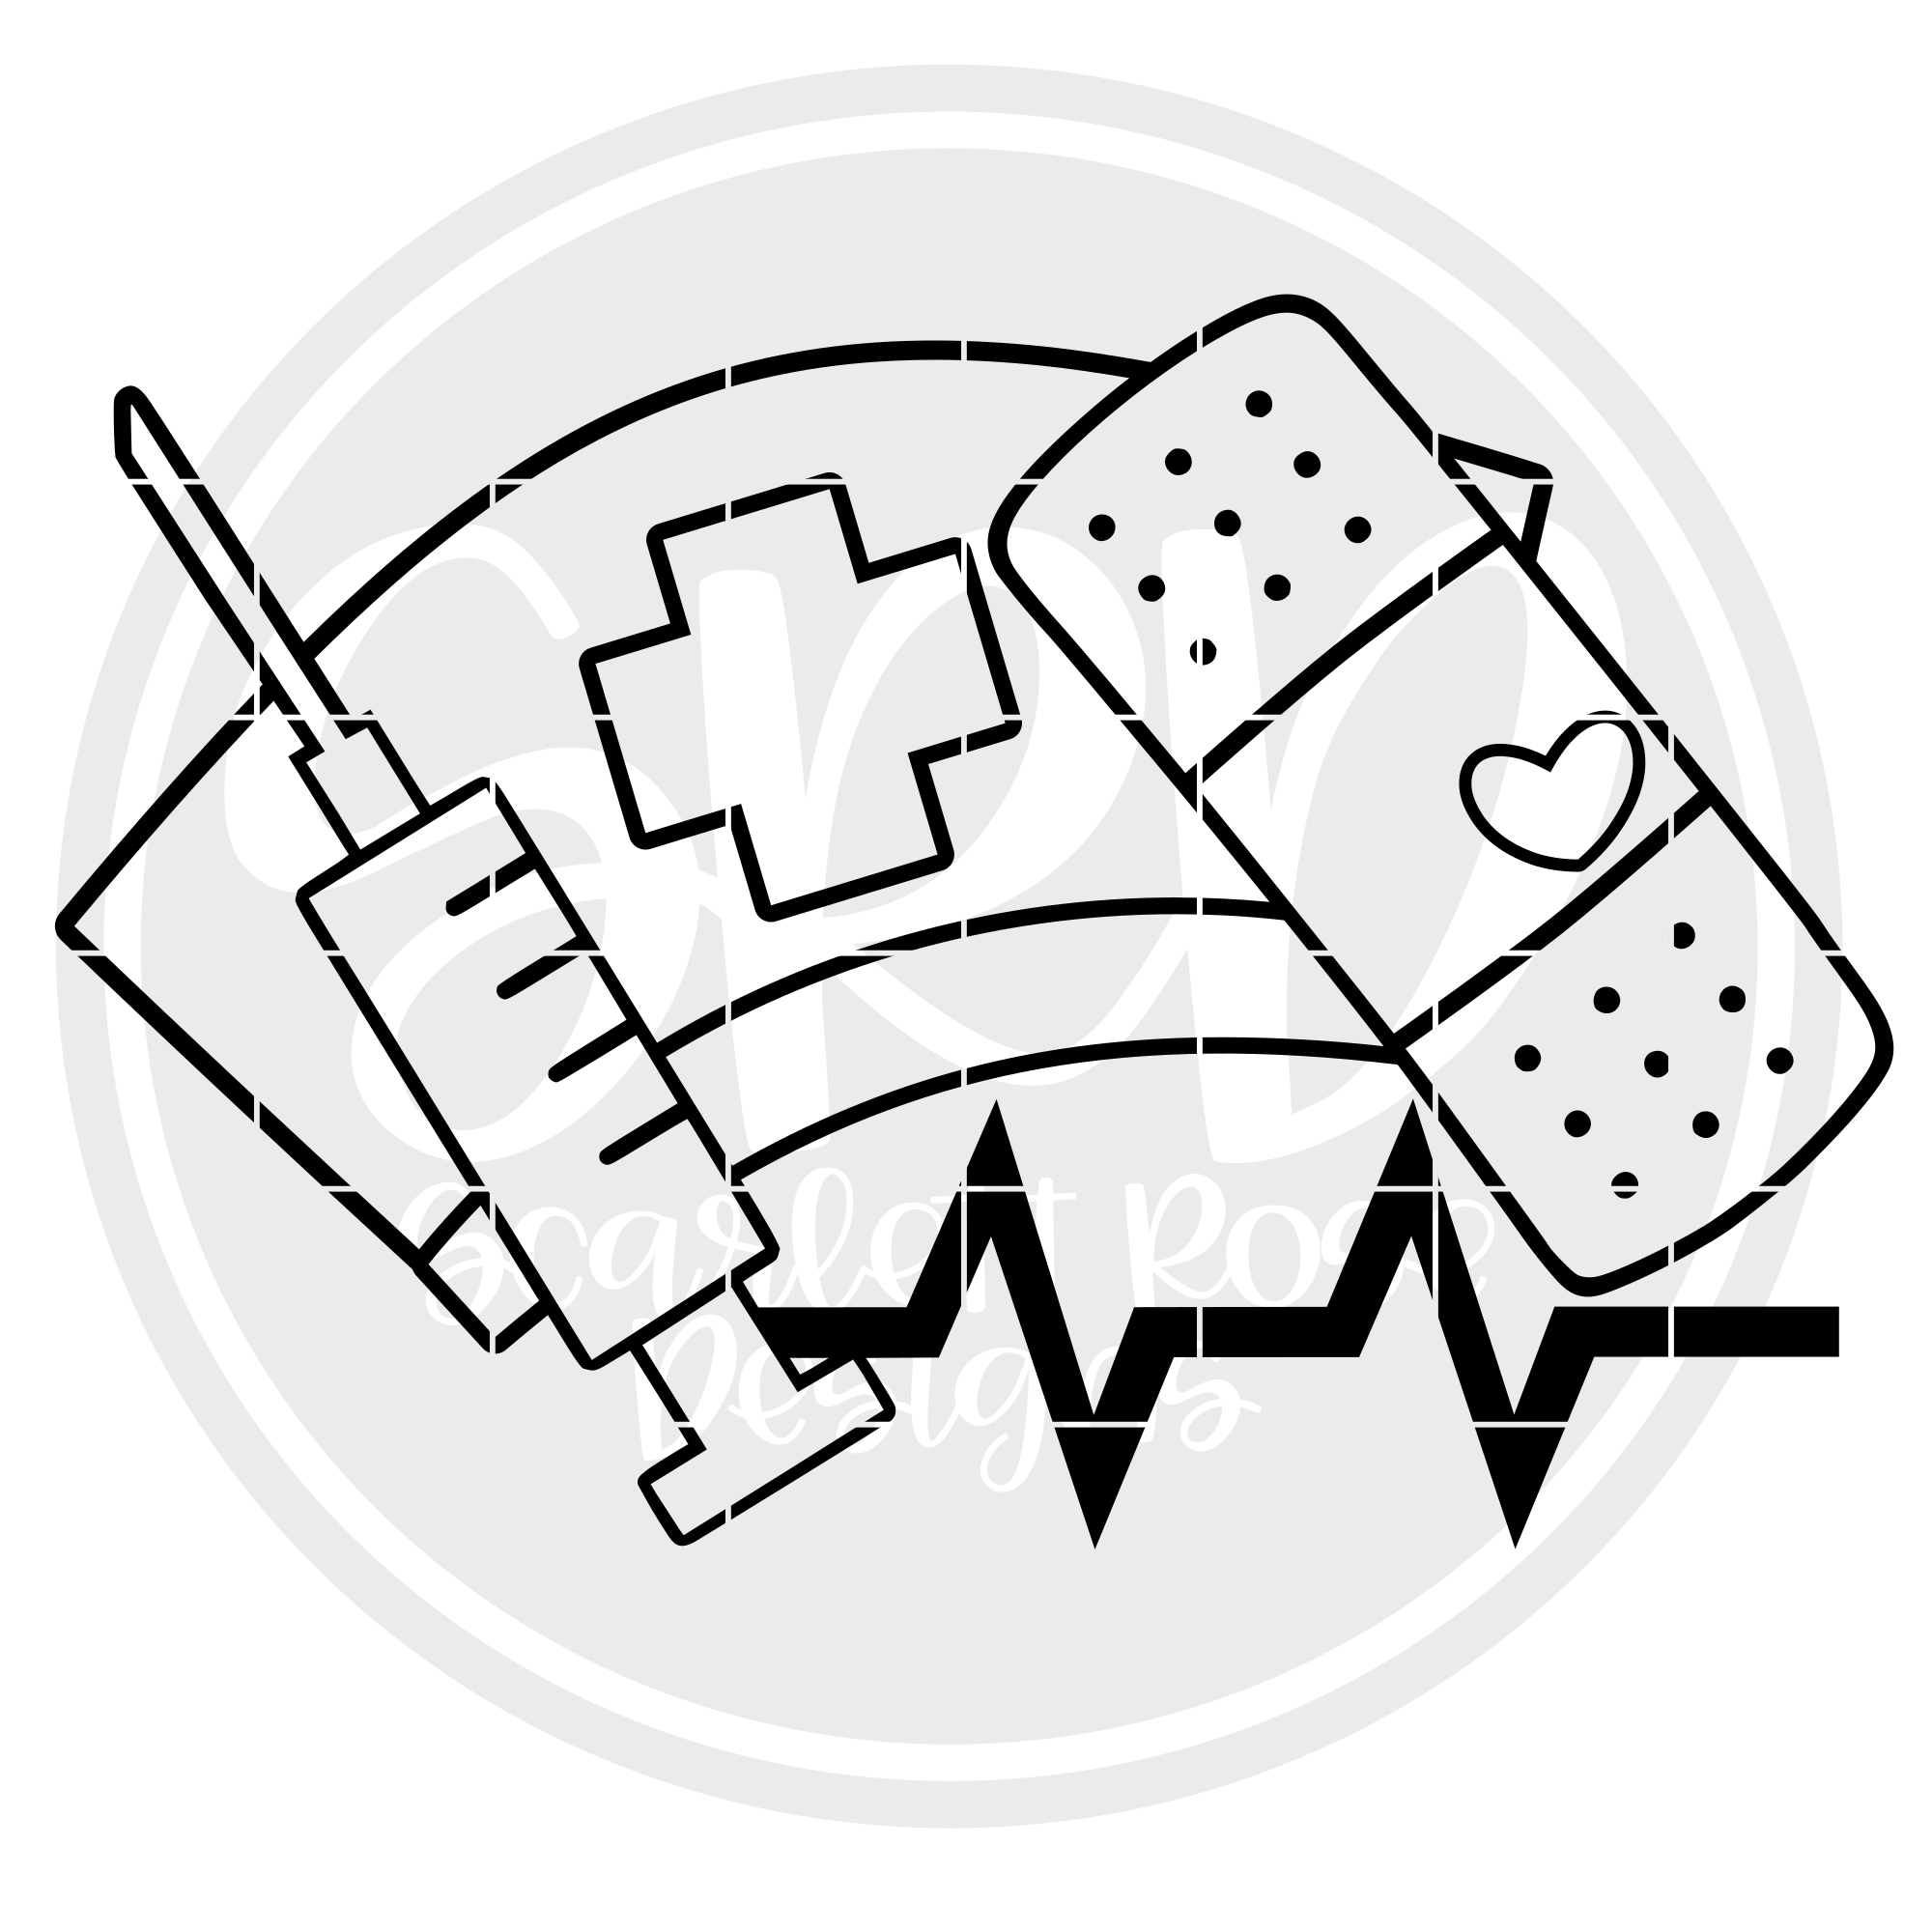 first aid kit coloring pages